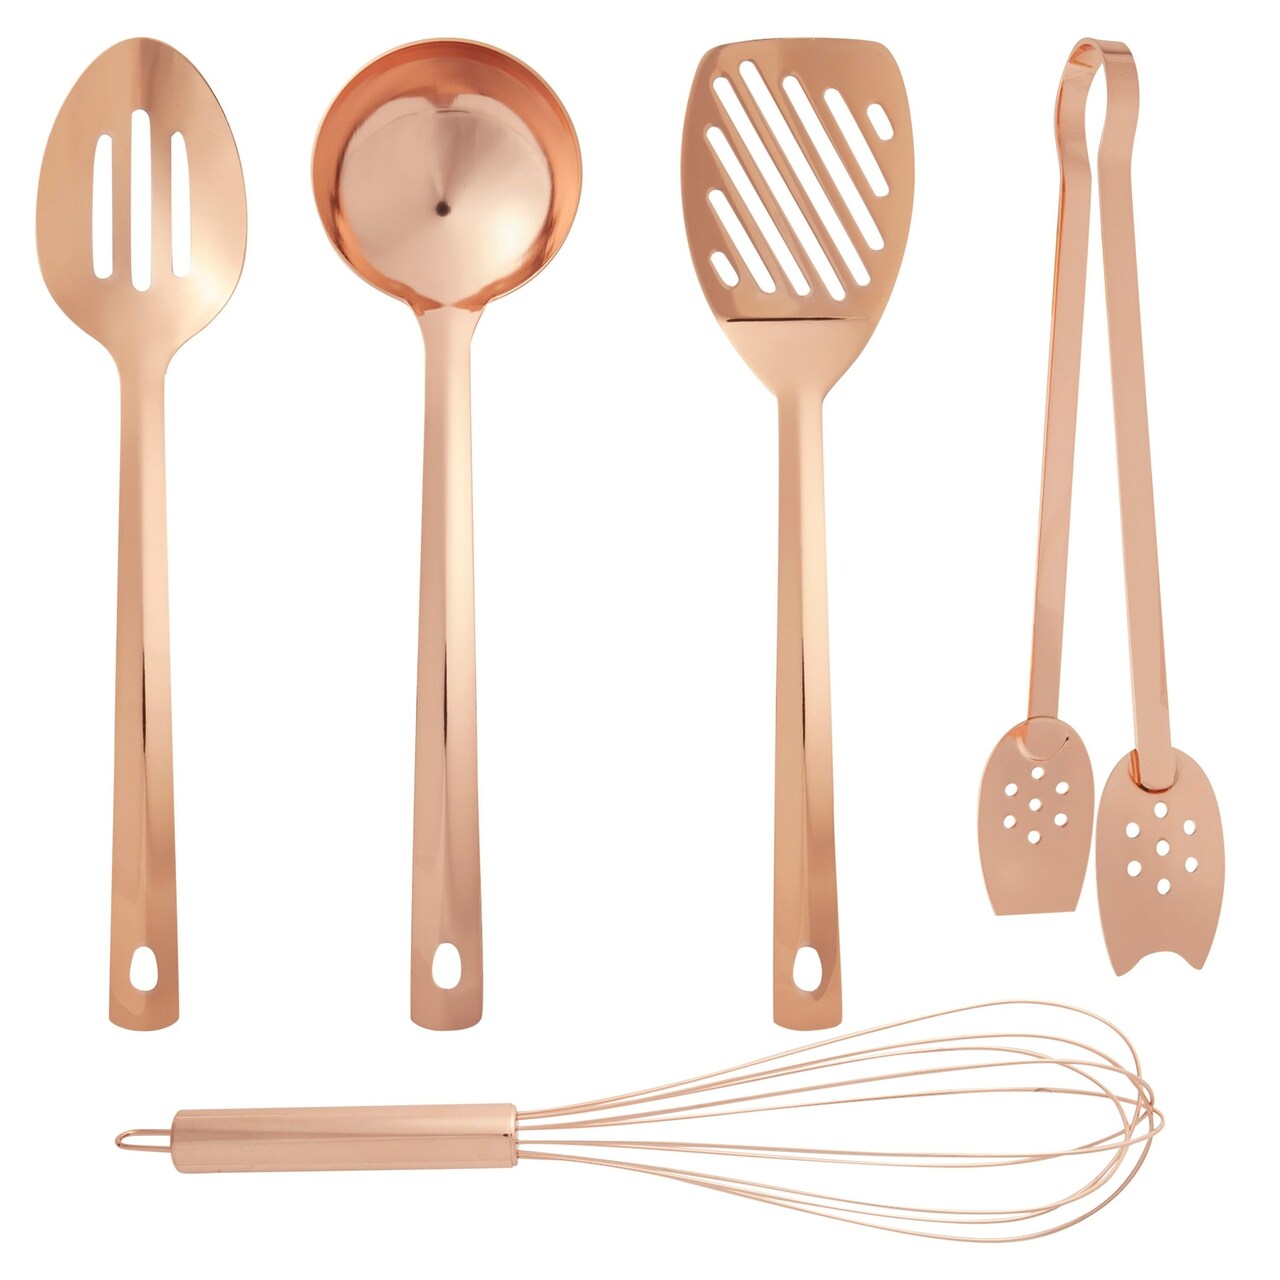 5 Pcs Copper Cooking Utensils Set, Rose Gold Cookware with Ladle, Whisk,  Tongs, Slotted Spatula, Spoon, Copper Kitchen Tool Set, Cooking Accessories  and Serving Utensils